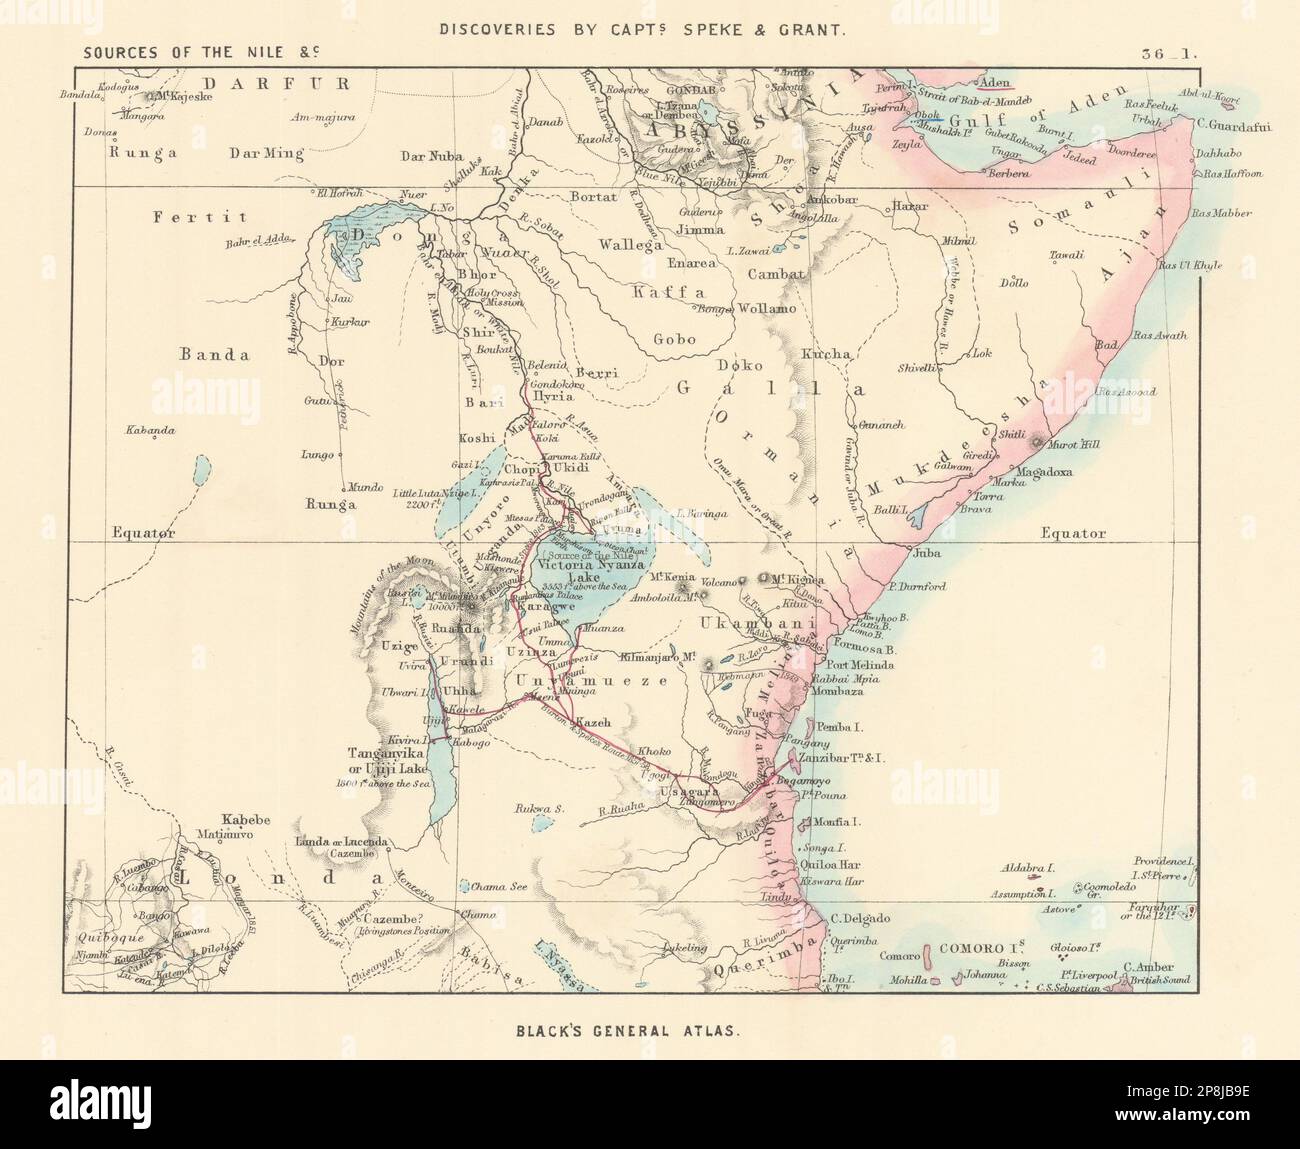 East Africa. Speke & Grant route. Lake Victoria. Source of the Nile 1862 map Stock Photo